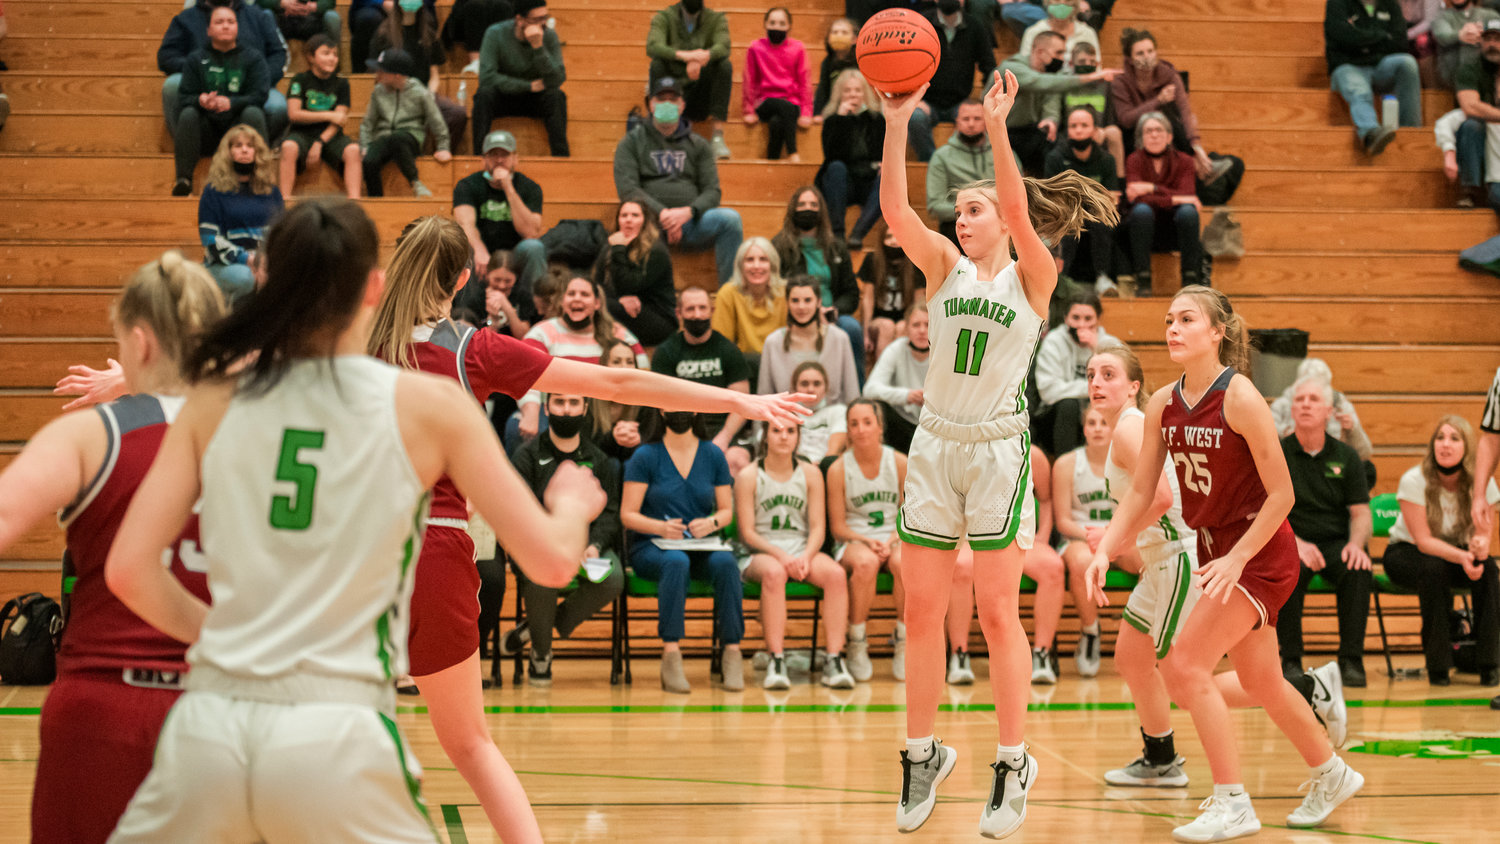 Tumwater’s Kylie Waltermeyer (11) looks to shoot Wednesday night during a game.